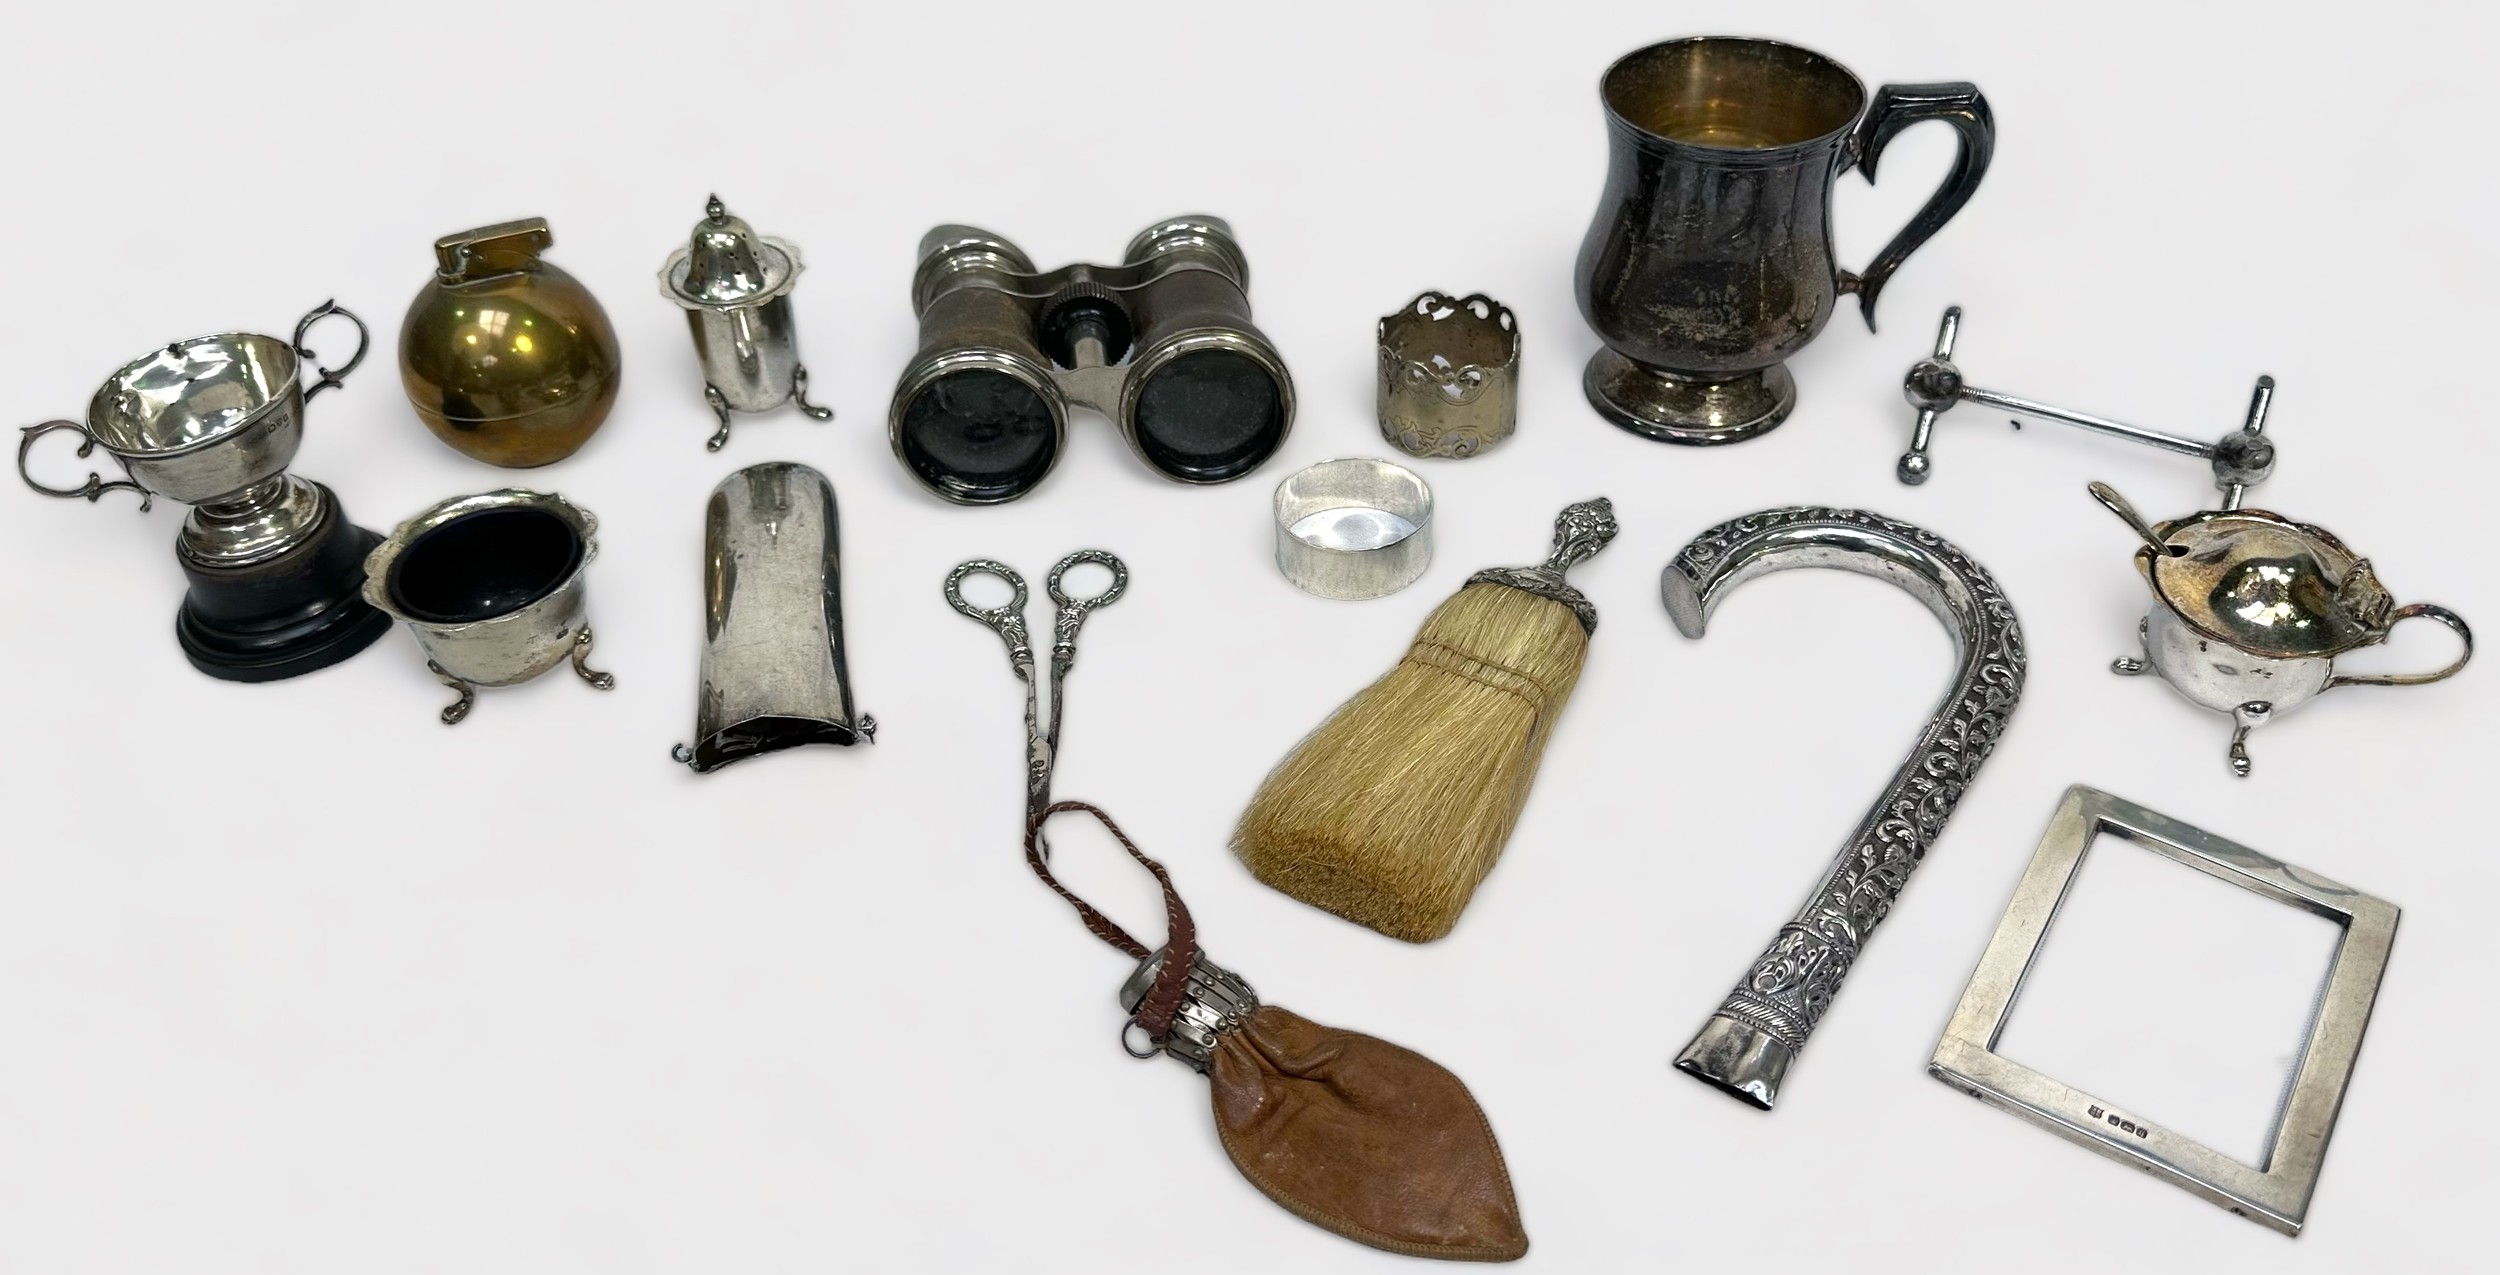 A silver-mounted dusting brush, scissors, spectacle case, napkin ring, trophy cup, etc, together